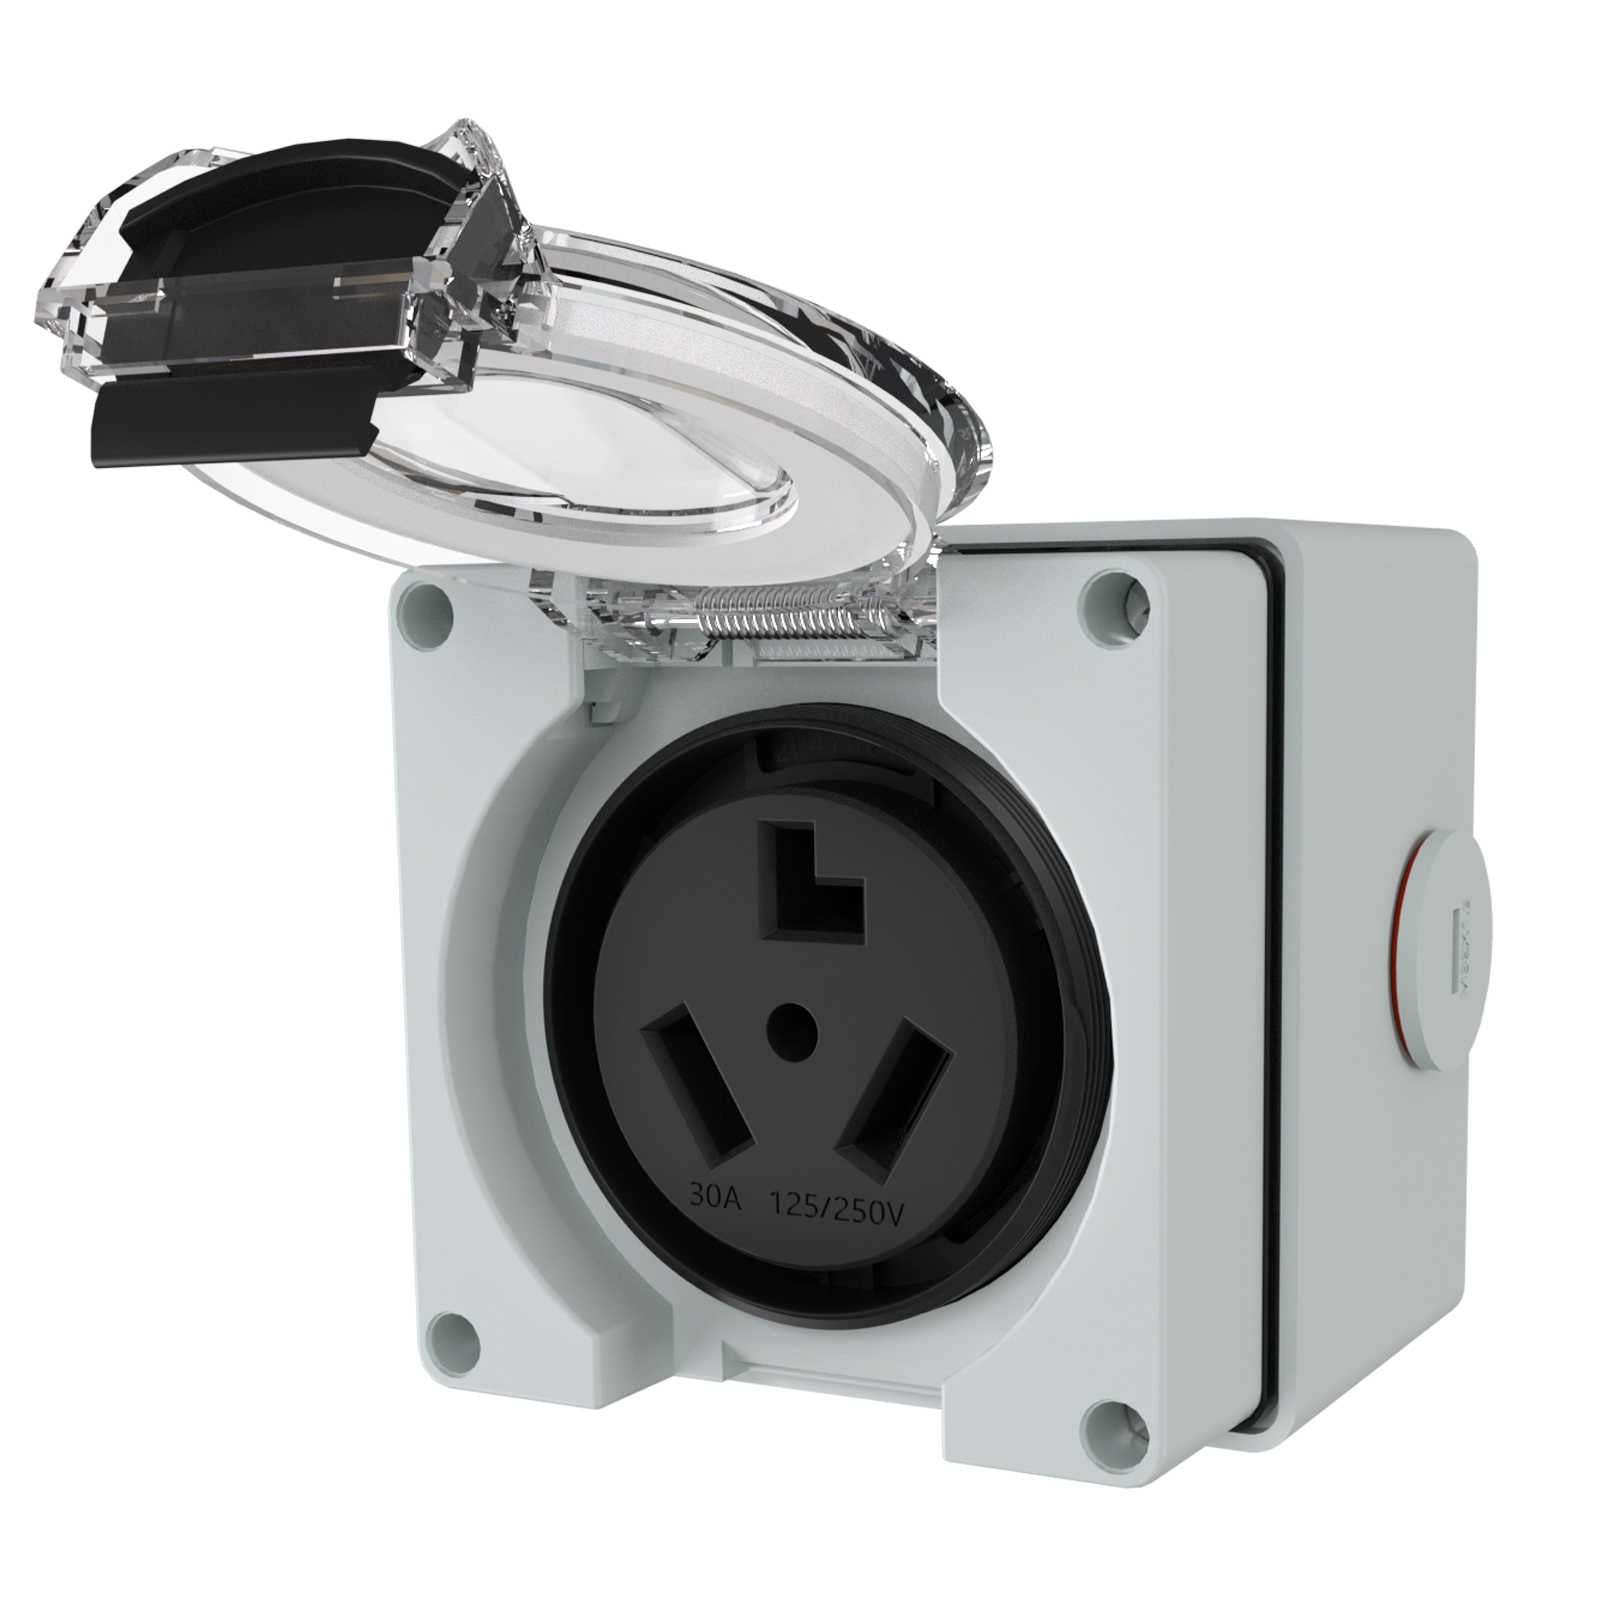 10-30R 30Amp Power Outlet Box For Electric Dryers Heavy Duty Industrial Grade Power Receptacle